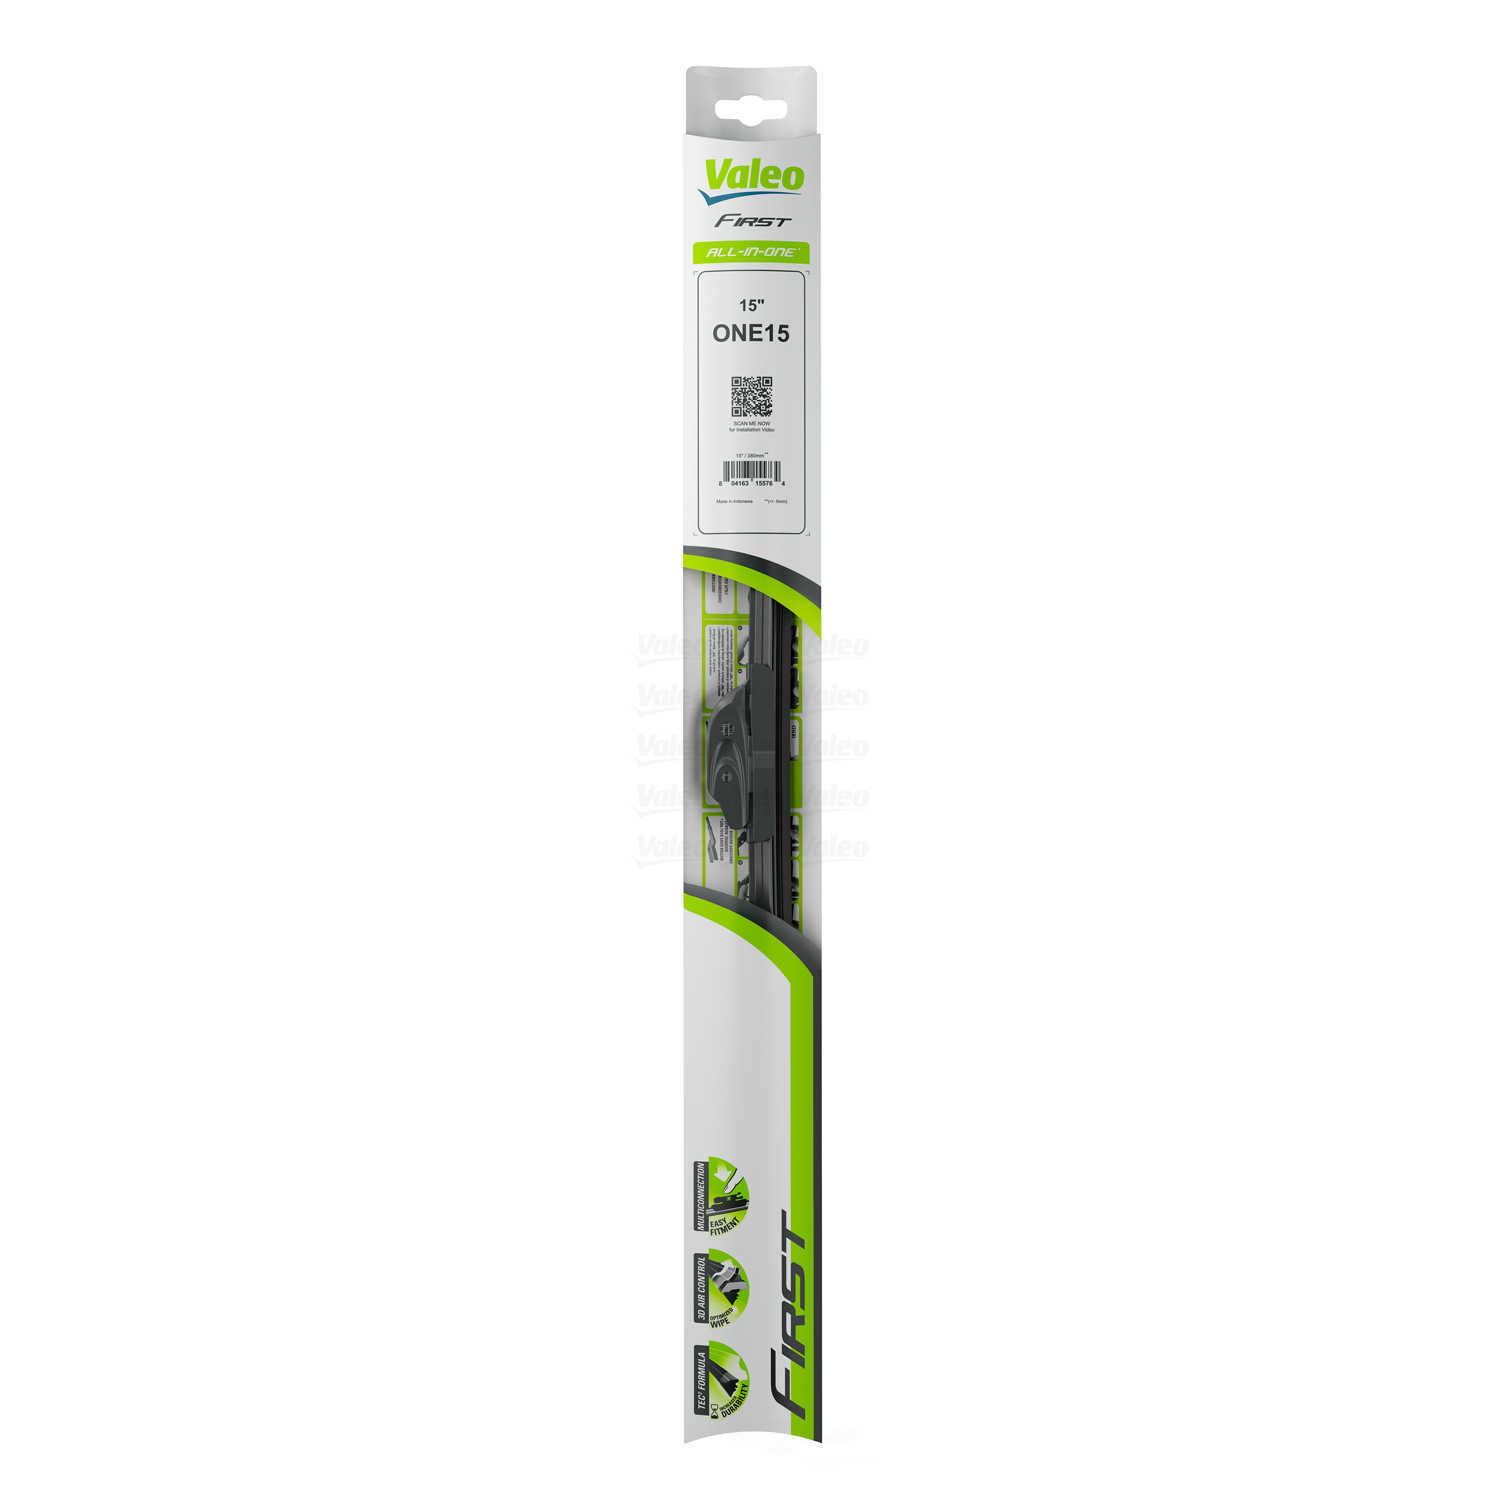 VALEO - First All-in-one Windshield Wiper Blade (Rear) - VEO ONE15